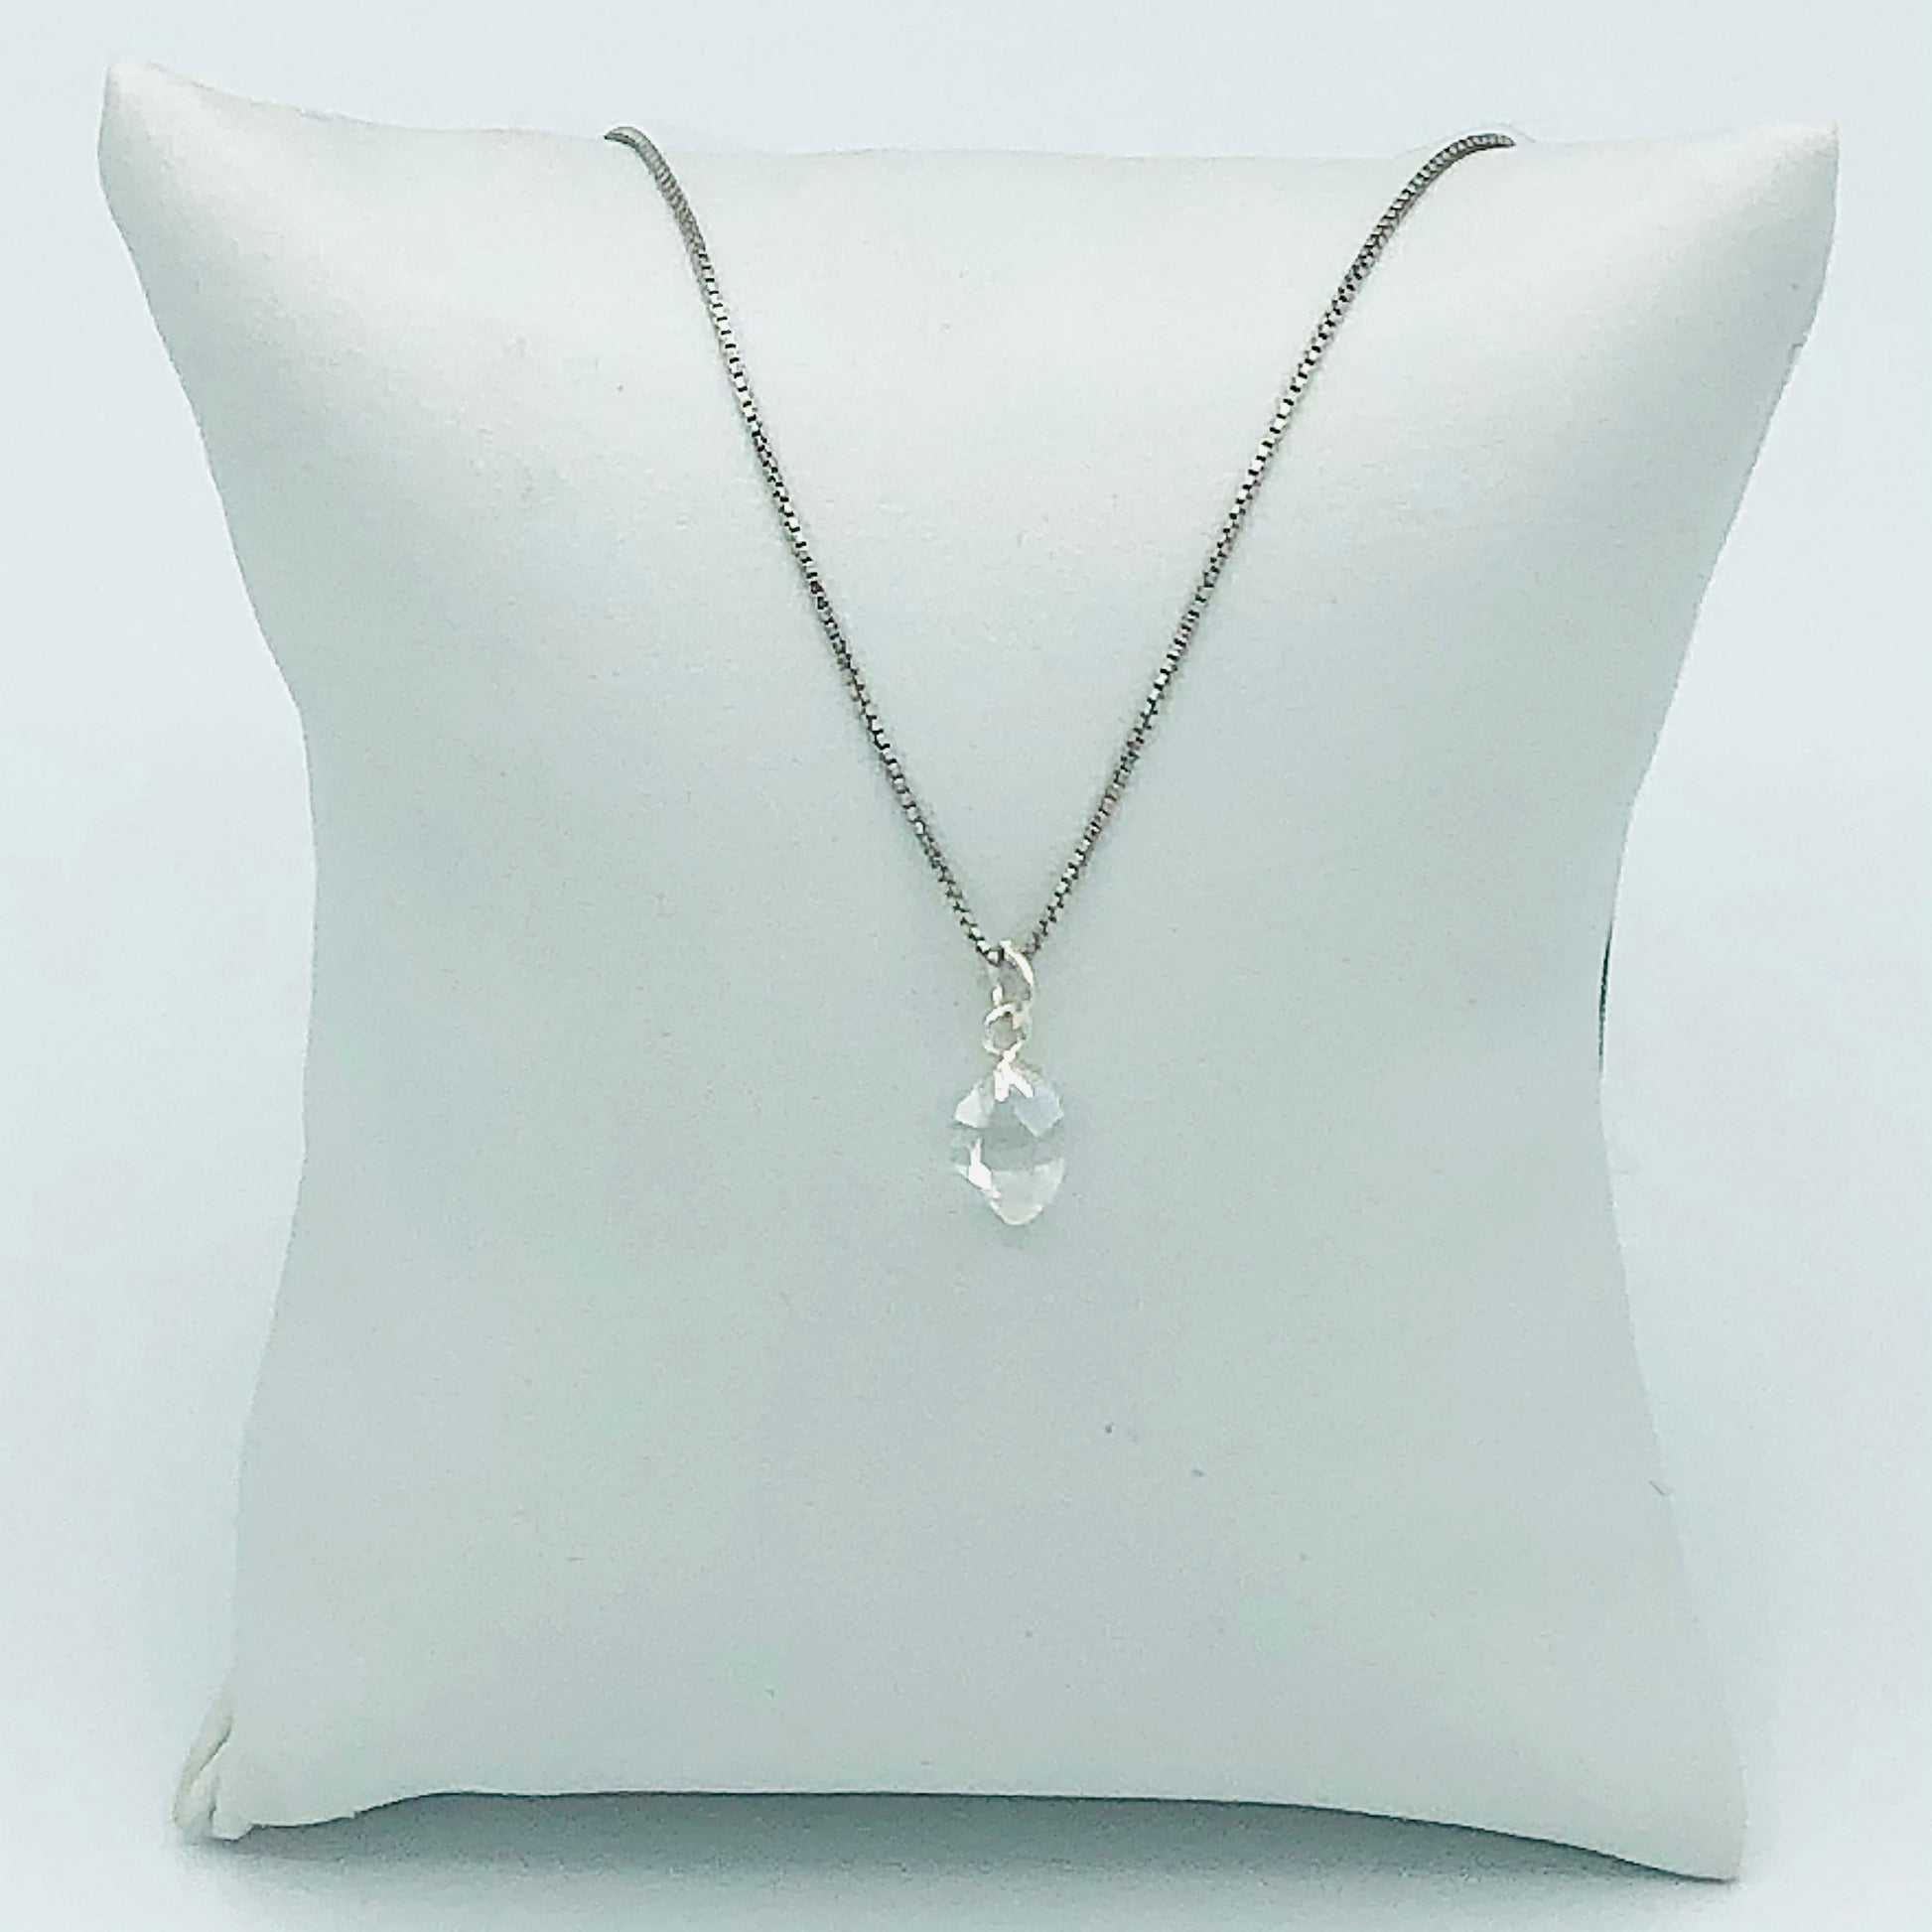 Herkimer Diamond Rhodium Plated Sterling Silver Box Chain on a jewelry pillow. (The Jewelry pillow is intended to be a prop and is not included in the purchase of the necklace. )